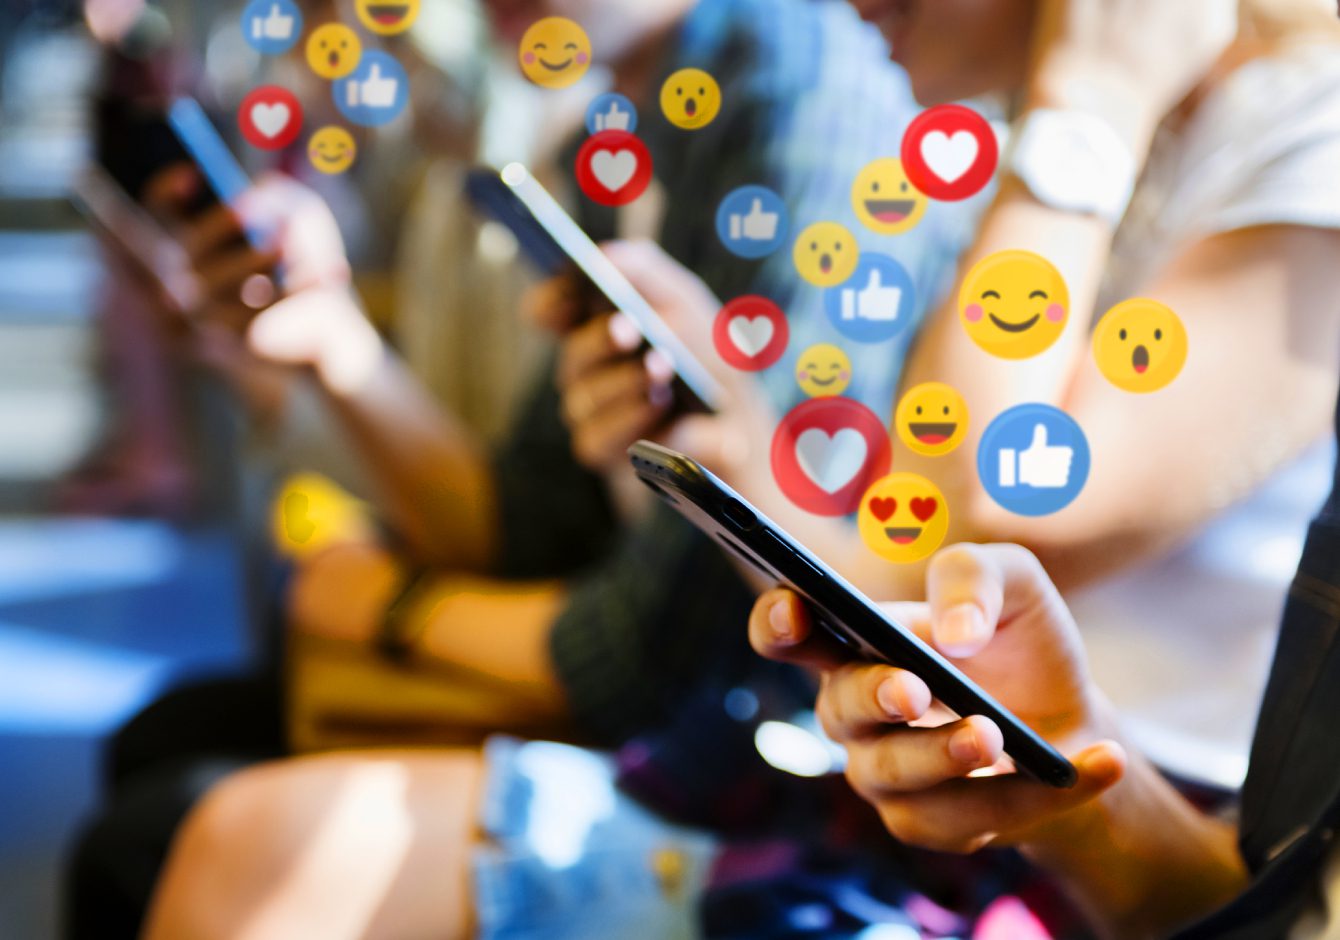 Hands holding smartphones with social media reaction emoji icons around them